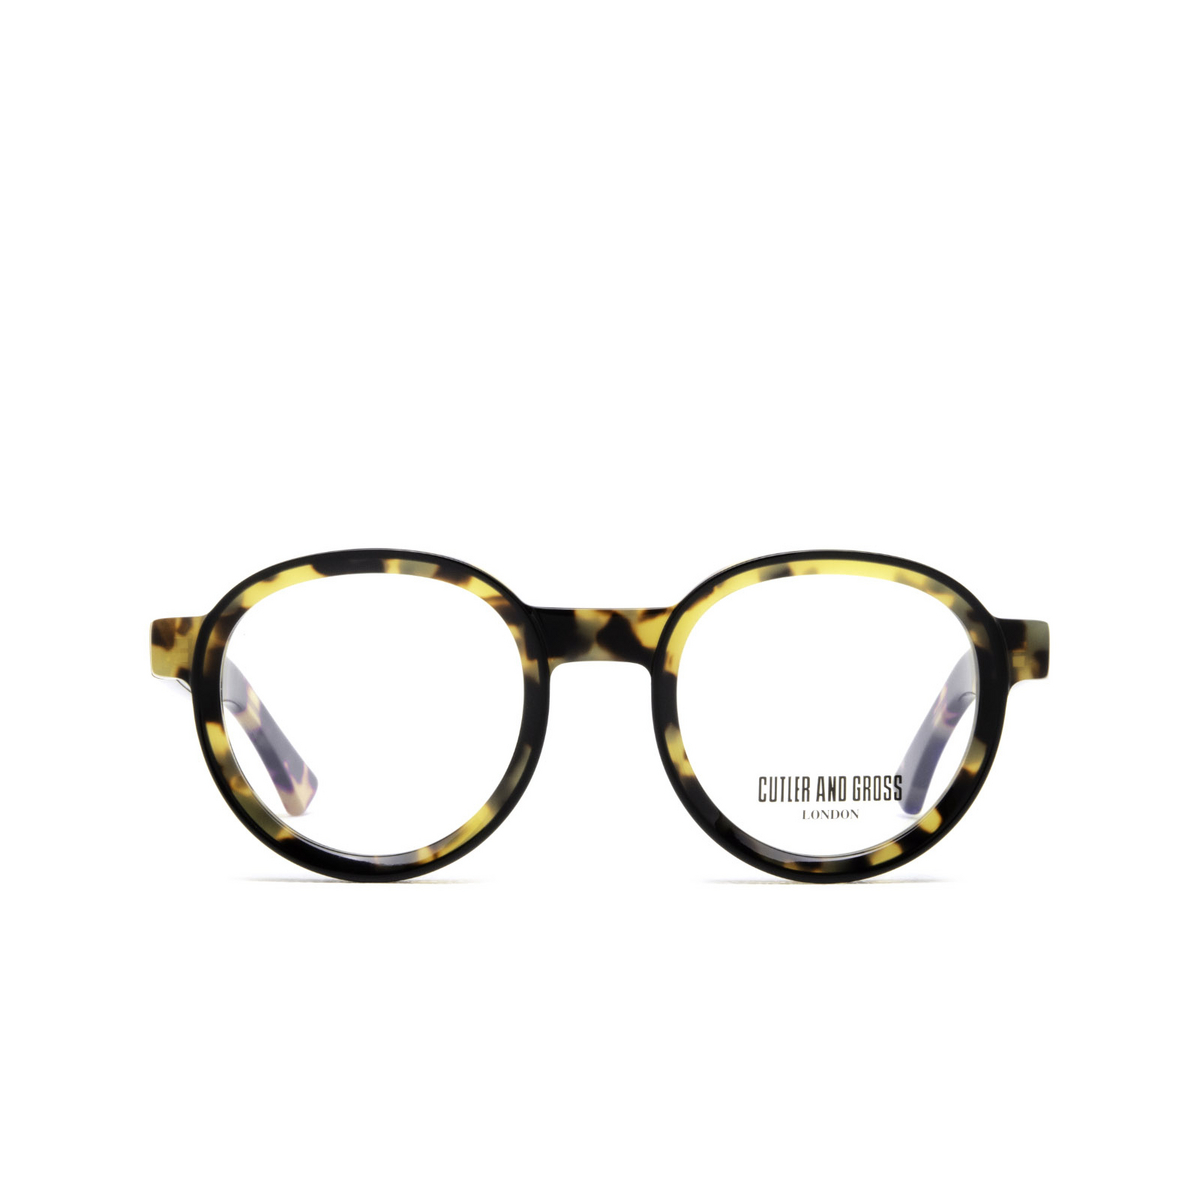 Cutler and Gross® Round Eyeglasses: 1384 color Black On Camo 03 - front view.